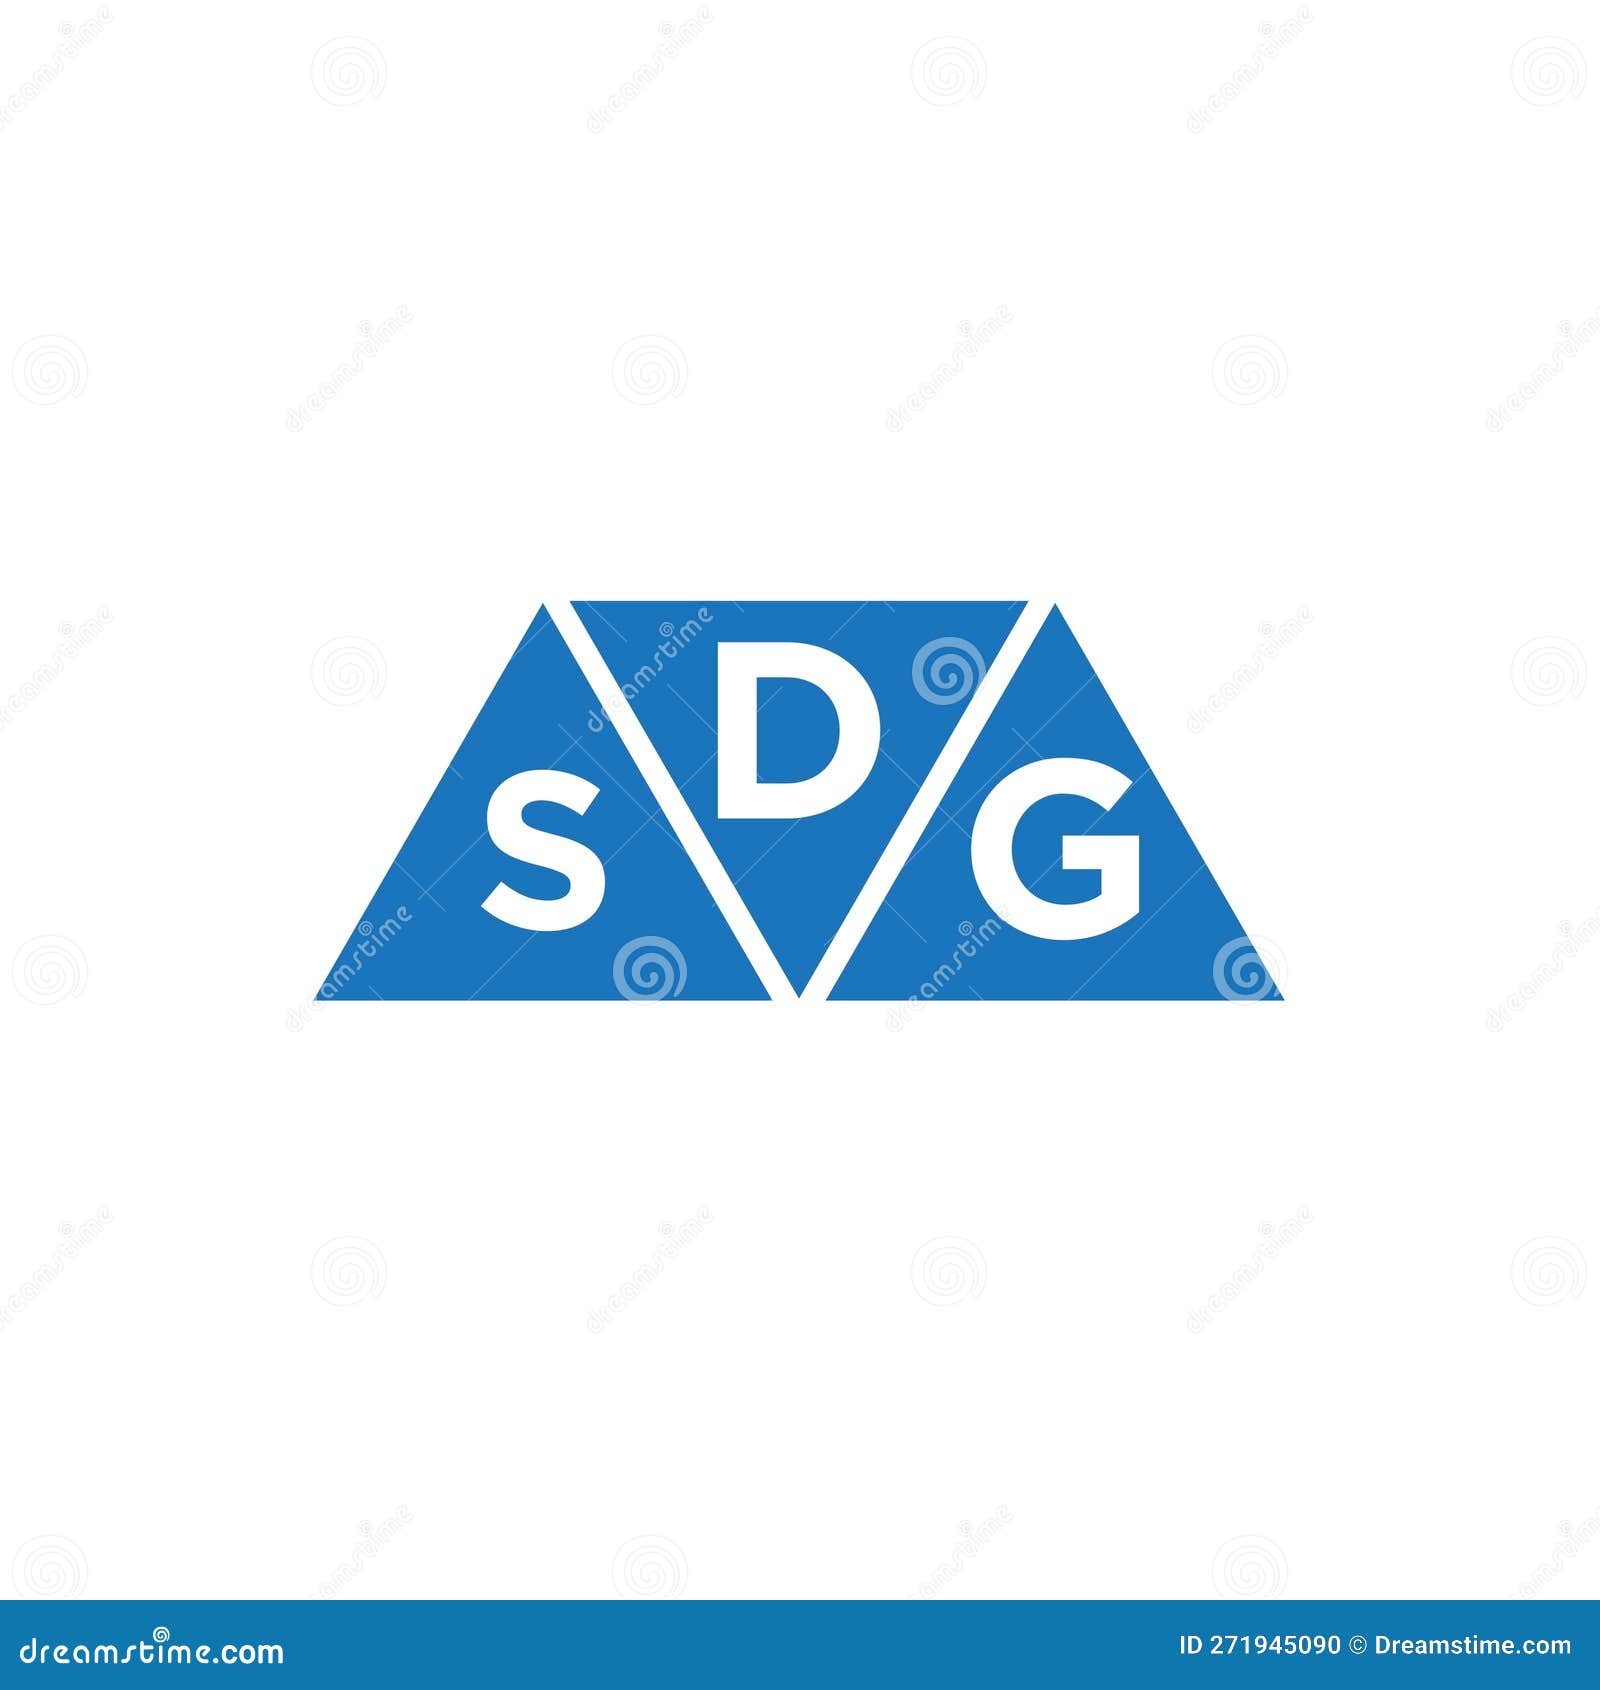 Digital DSG Website and Multimedia Agency - Check our services